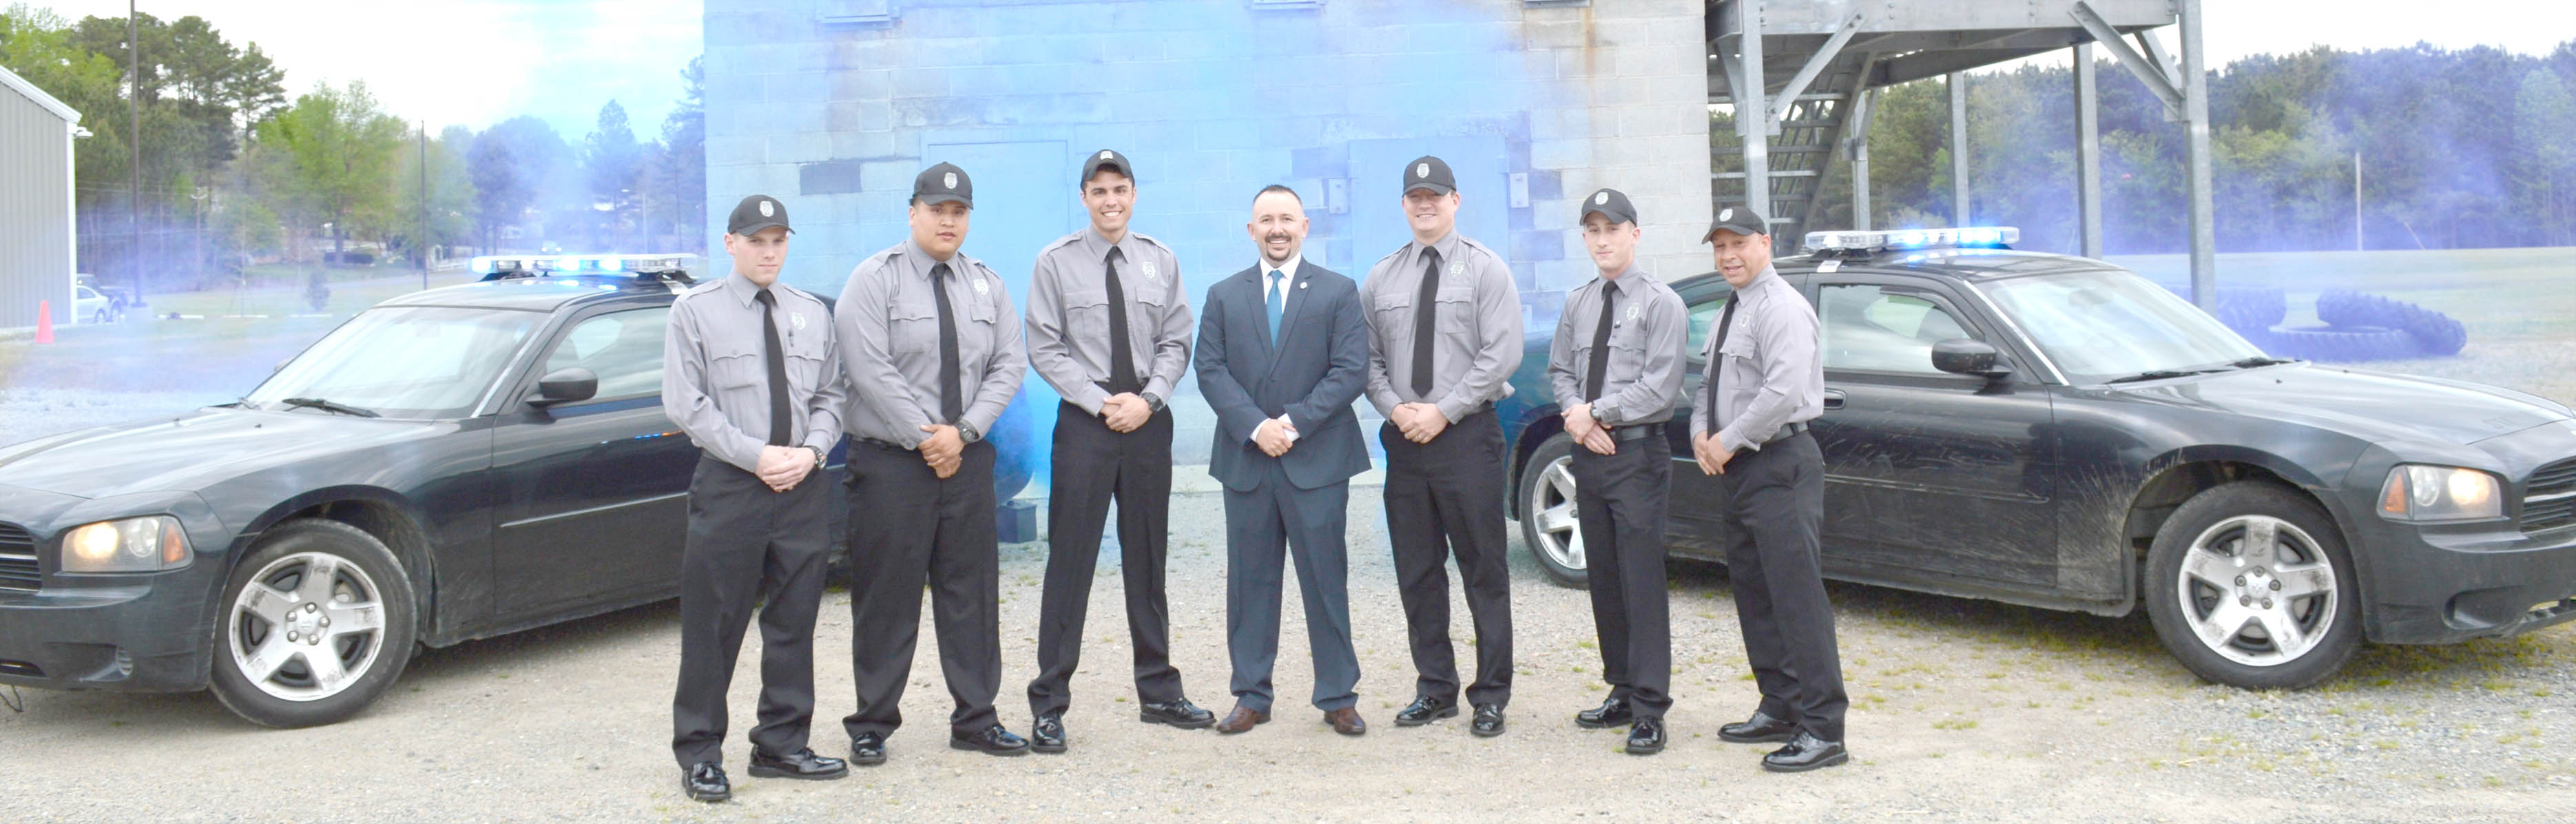 Click to enlarge,  Pictured are members of Central Carolina Community College's Basic Law Enforcement Training (BLET) graduating class -- Bryan Andersen, Roberto Flores, Benjamin Nuckols, Capt. Brian Estes of the Lee County Sheriff's Office, Patrick McKinnon, Grant Connick, and Osiris Pena. For more information about the college's BLET program, visit www.cccc.edu/blet or contact Robert Powell at rpowell@cccc.edu or 919-777-7774. 